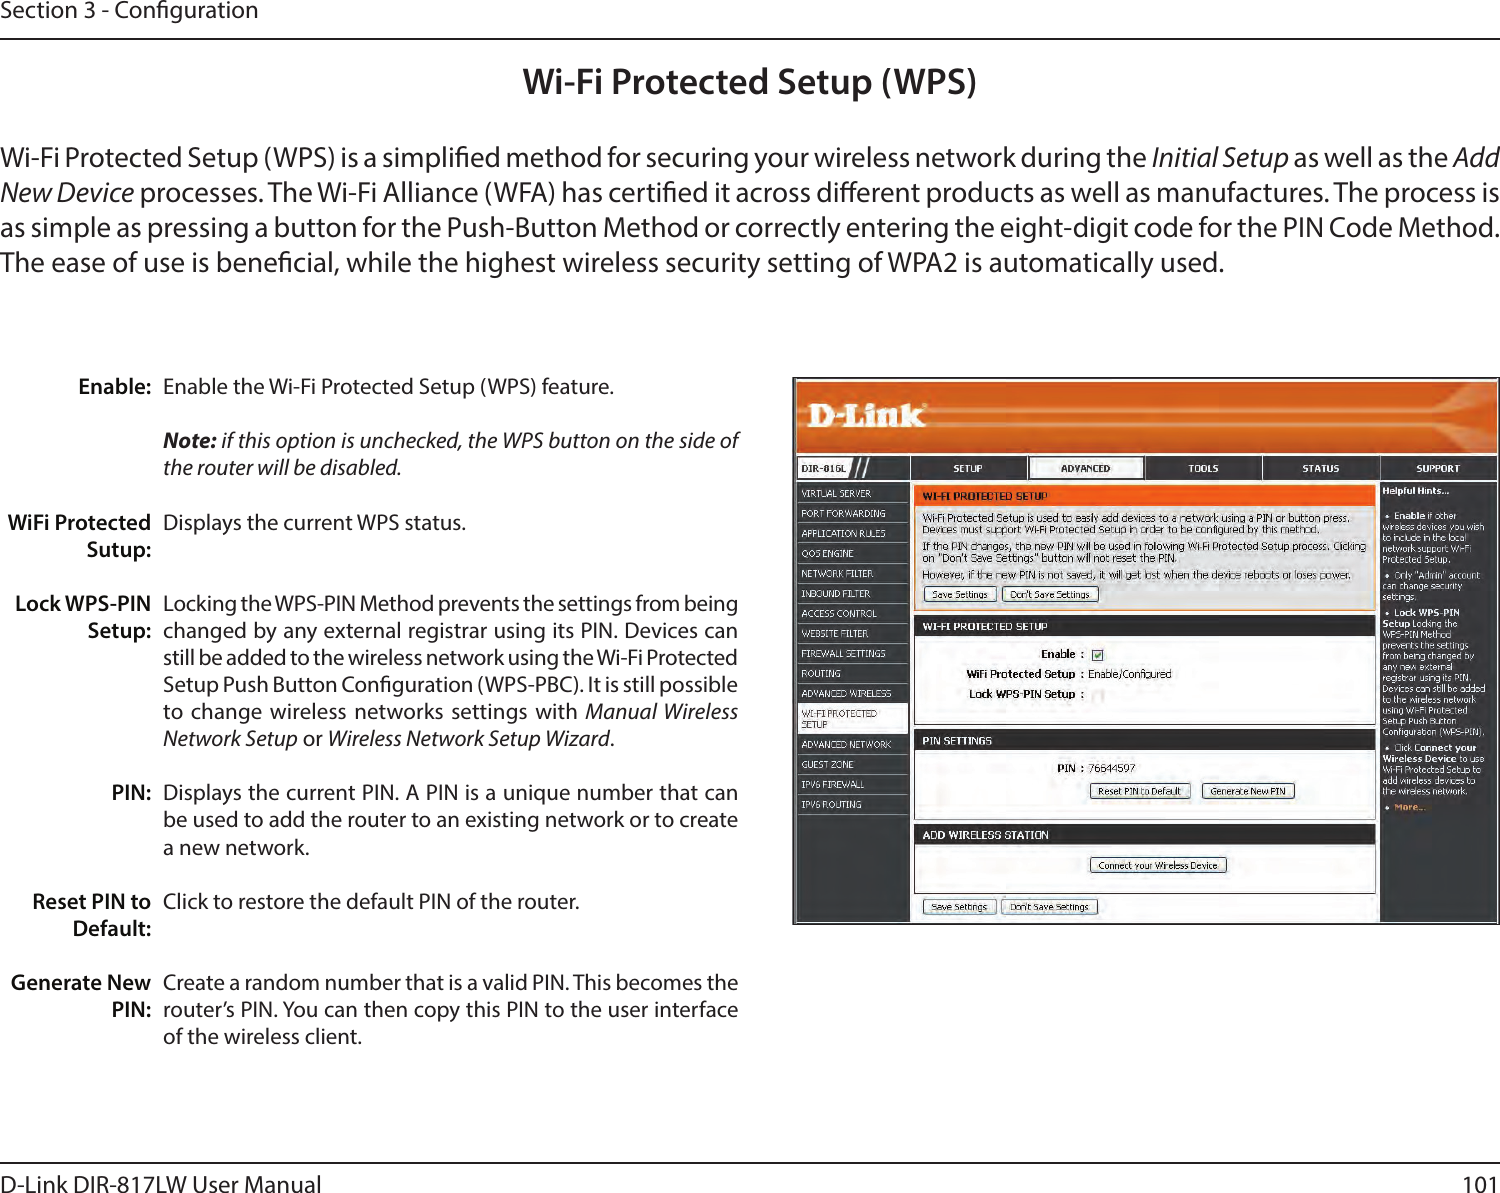 101D-Link DIR-817LW User ManualSection 3 - CongurationWi-Fi Protected Setup (WPS)Enable the Wi-Fi Protected Setup (WPS) feature. Note: if this option is unchecked, the WPS button on the side of the router will be disabled.Displays the current WPS status.Locking the WPS-PIN Method prevents the settings from being changed by any external registrar using its PIN. Devices can still be added to the wireless network using the Wi-Fi Protected Setup Push Button Conguration (WPS-PBC). It is still possible to change wireless networks settings with Manual Wireless Network Setup or Wireless Network Setup Wizard.Displays the current PIN. A PIN is a unique number that can be used to add the router to an existing network or to create a new network. Click to restore the default PIN of the router. Create a random number that is a valid PIN. This becomes the router’s PIN. You can then copy this PIN to the user interface of the wireless client.Enable:WiFi Protected Sutup:Lock WPS-PIN Setup:PIN:Reset PIN to Default:Generate New PIN:Wi-Fi Protected Setup (WPS) is a simplied method for securing your wireless network during the Initial Setup as well as the Add New Device processes. The Wi-Fi Alliance (WFA) has certied it across dierent products as well as manufactures. The process is as simple as pressing a button for the Push-Button Method or correctly entering the eight-digit code for the PIN Code Method. The ease of use is benecial, while the highest wireless security setting of WPA2 is automatically used.